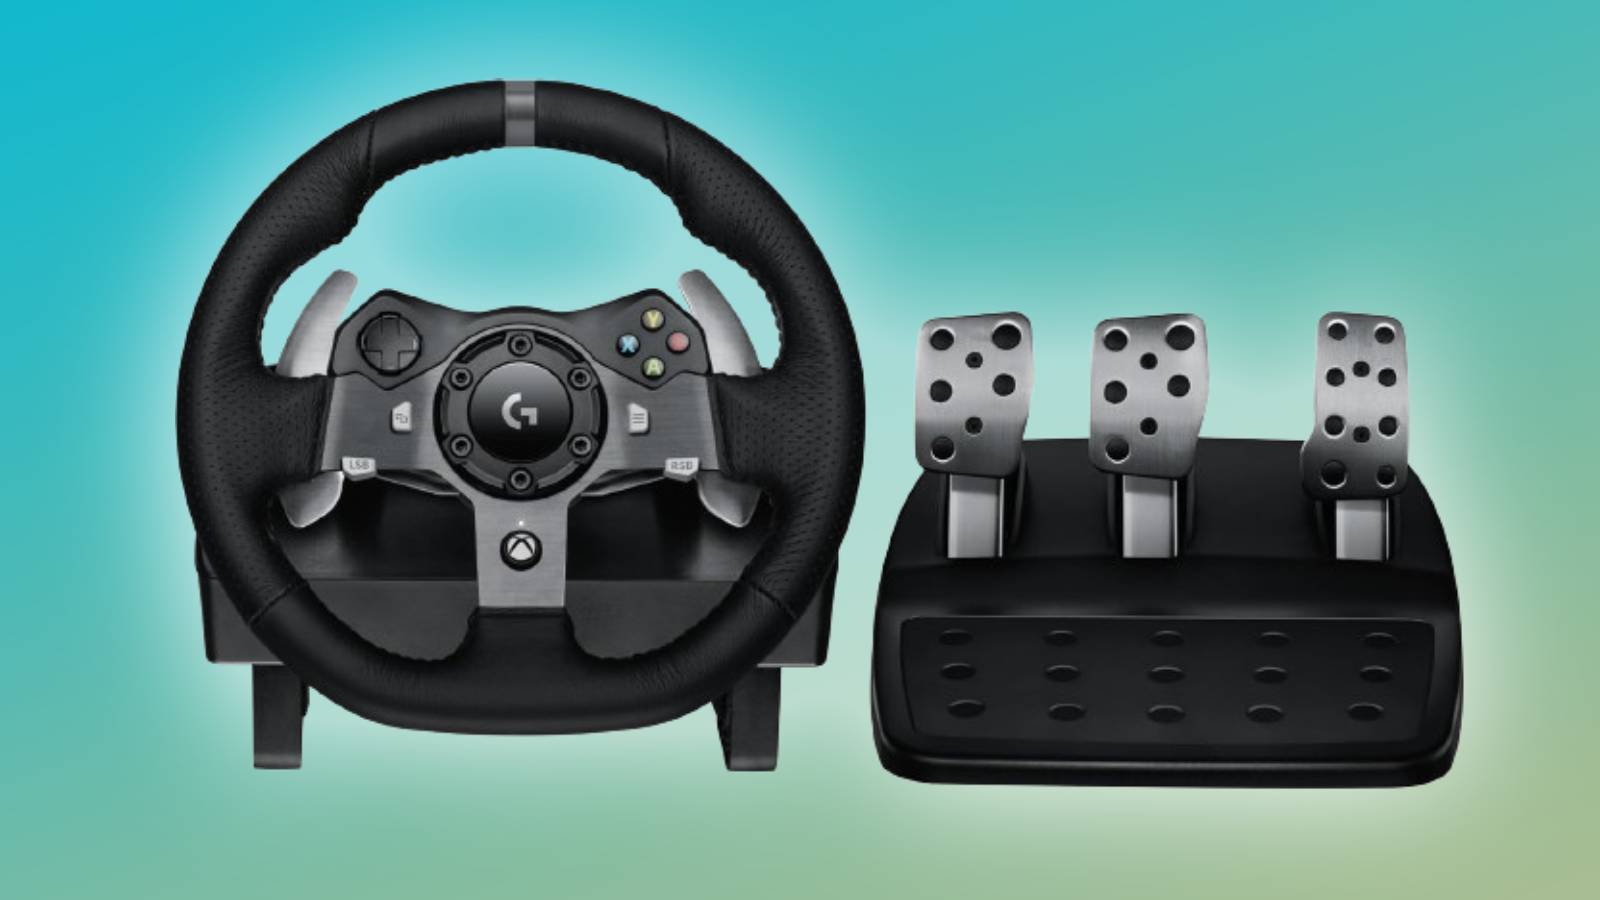 Image of the Logitech G920 Driving Force Racing Wheel and Floor Pedals on a green background.